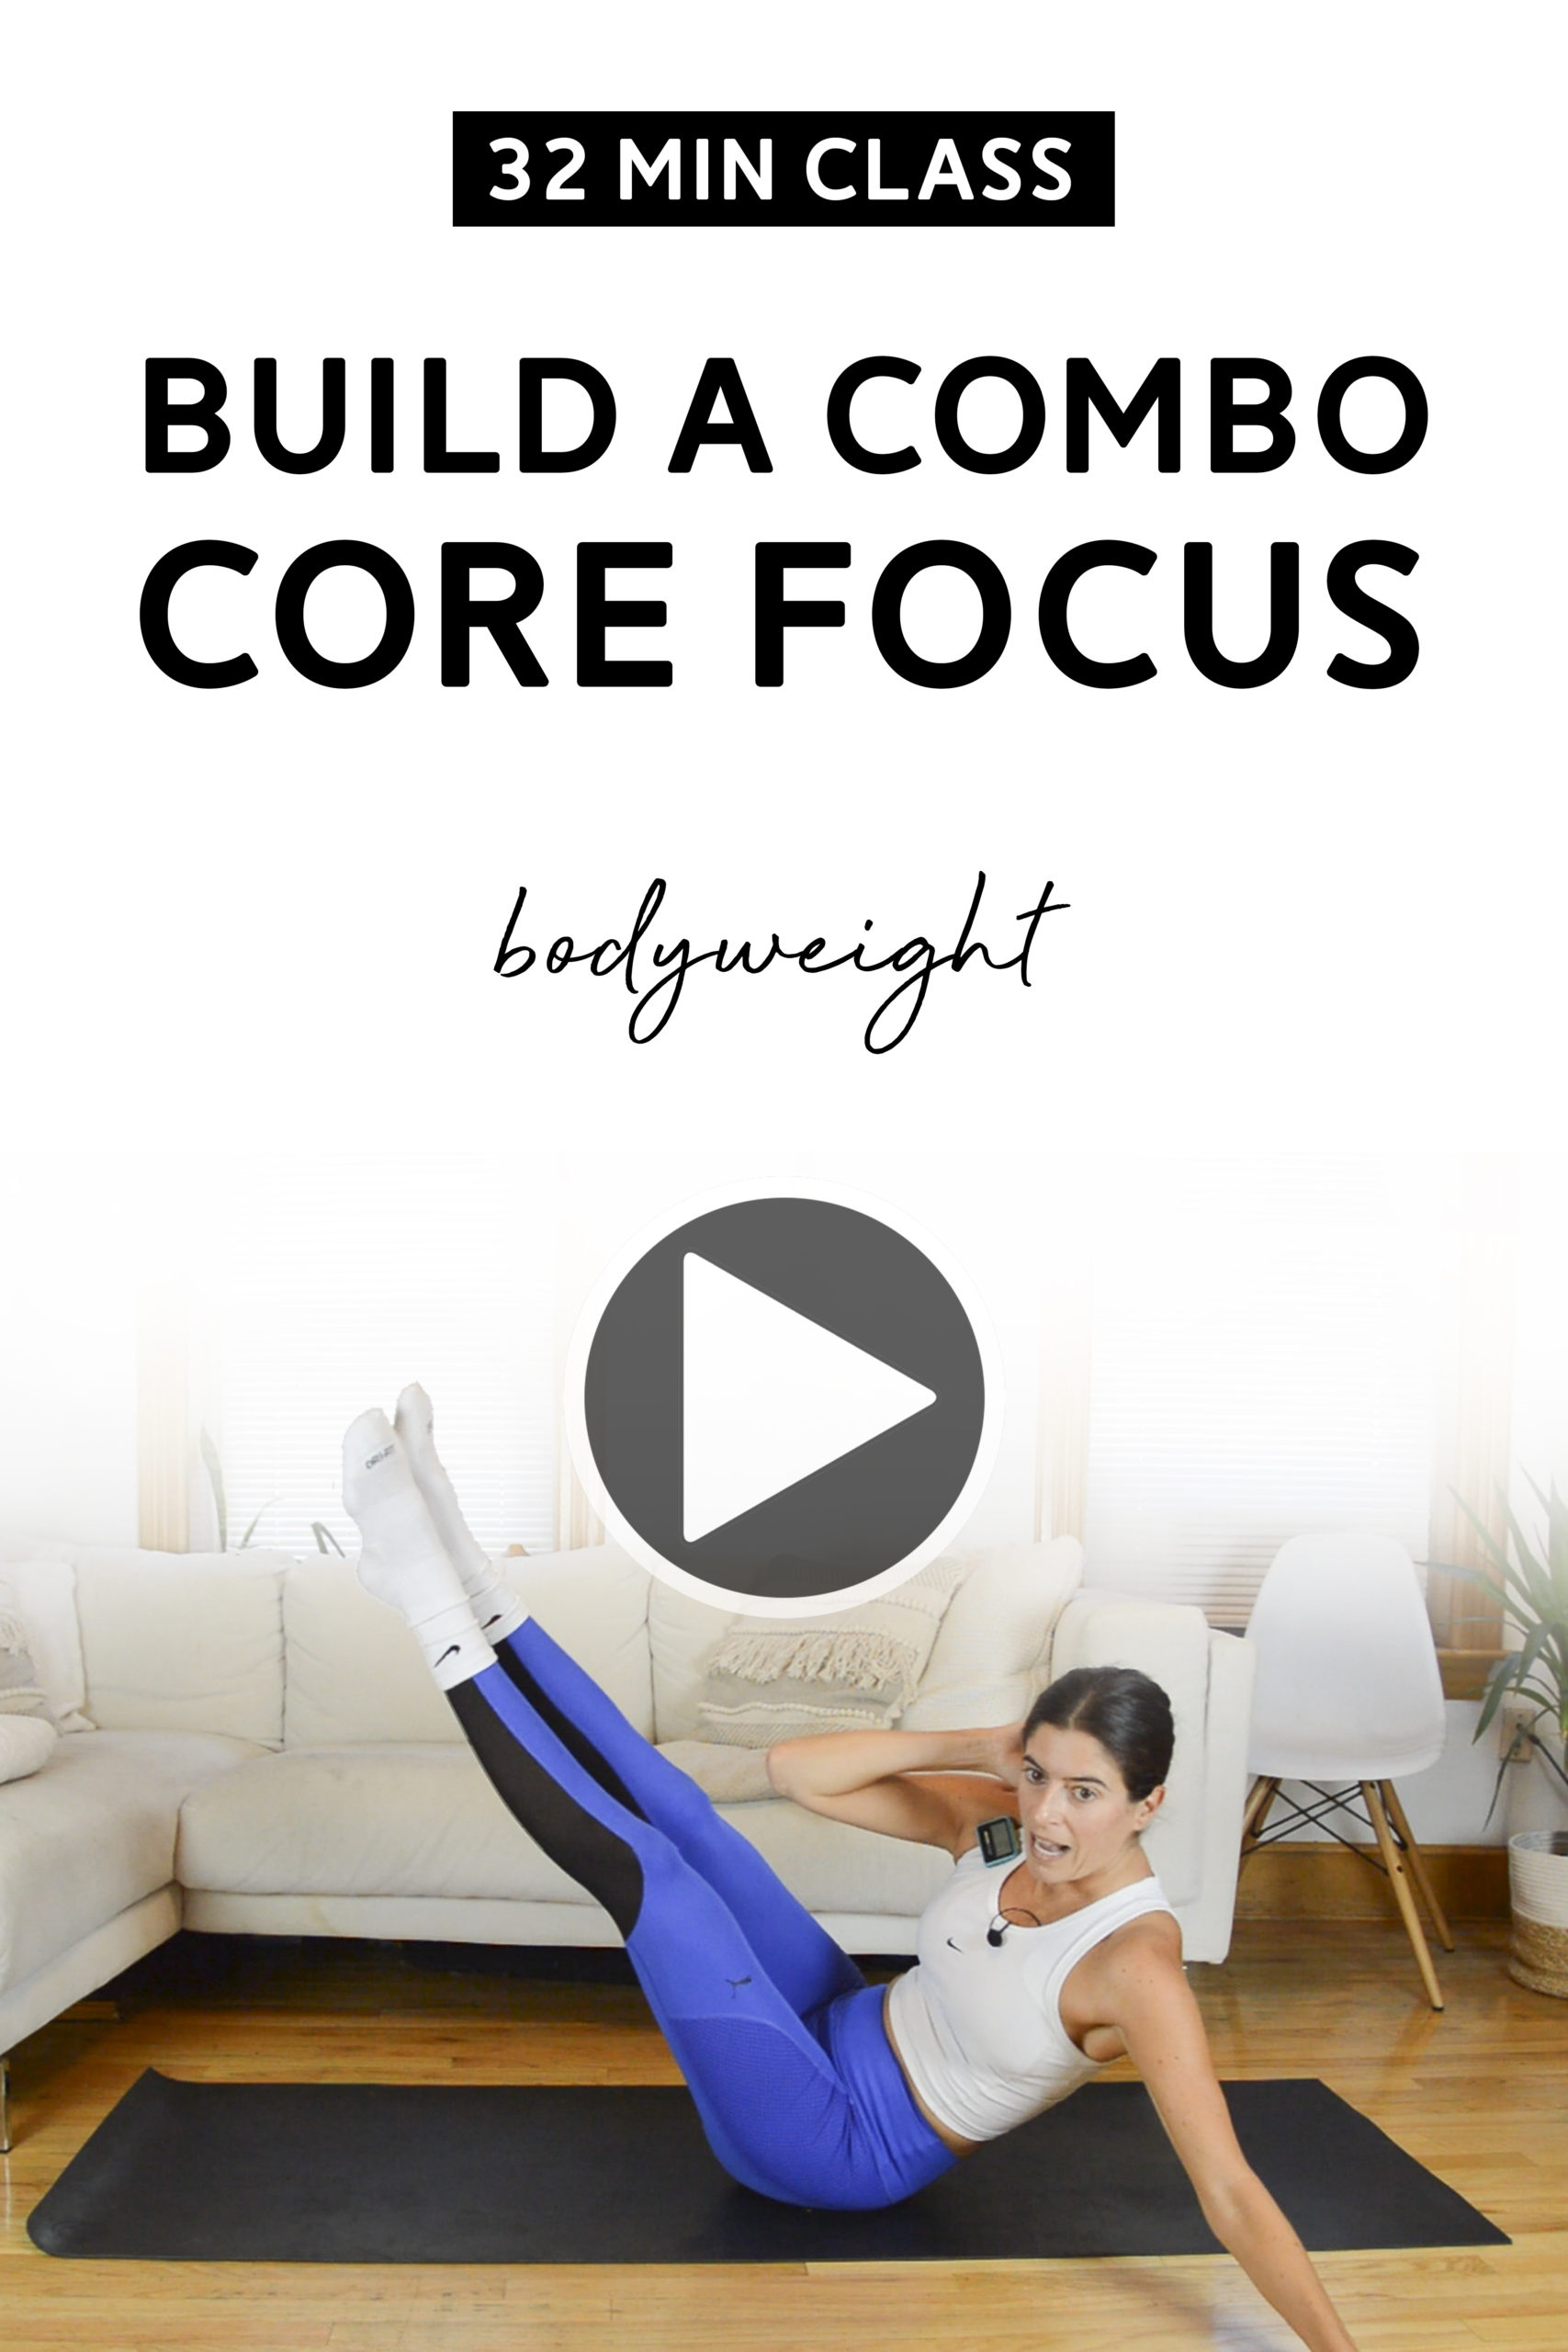 Build a Combo Class (32 Mins) - Core Focus Workout, Bodyweight | In Build a Combo classes, you gradually build a sequence of exercises. In this core focus workout, no equipment is needed. Video up on YouTube! #workoutclass #coreworkout #workoutvideo #youtubeworkout #youtube